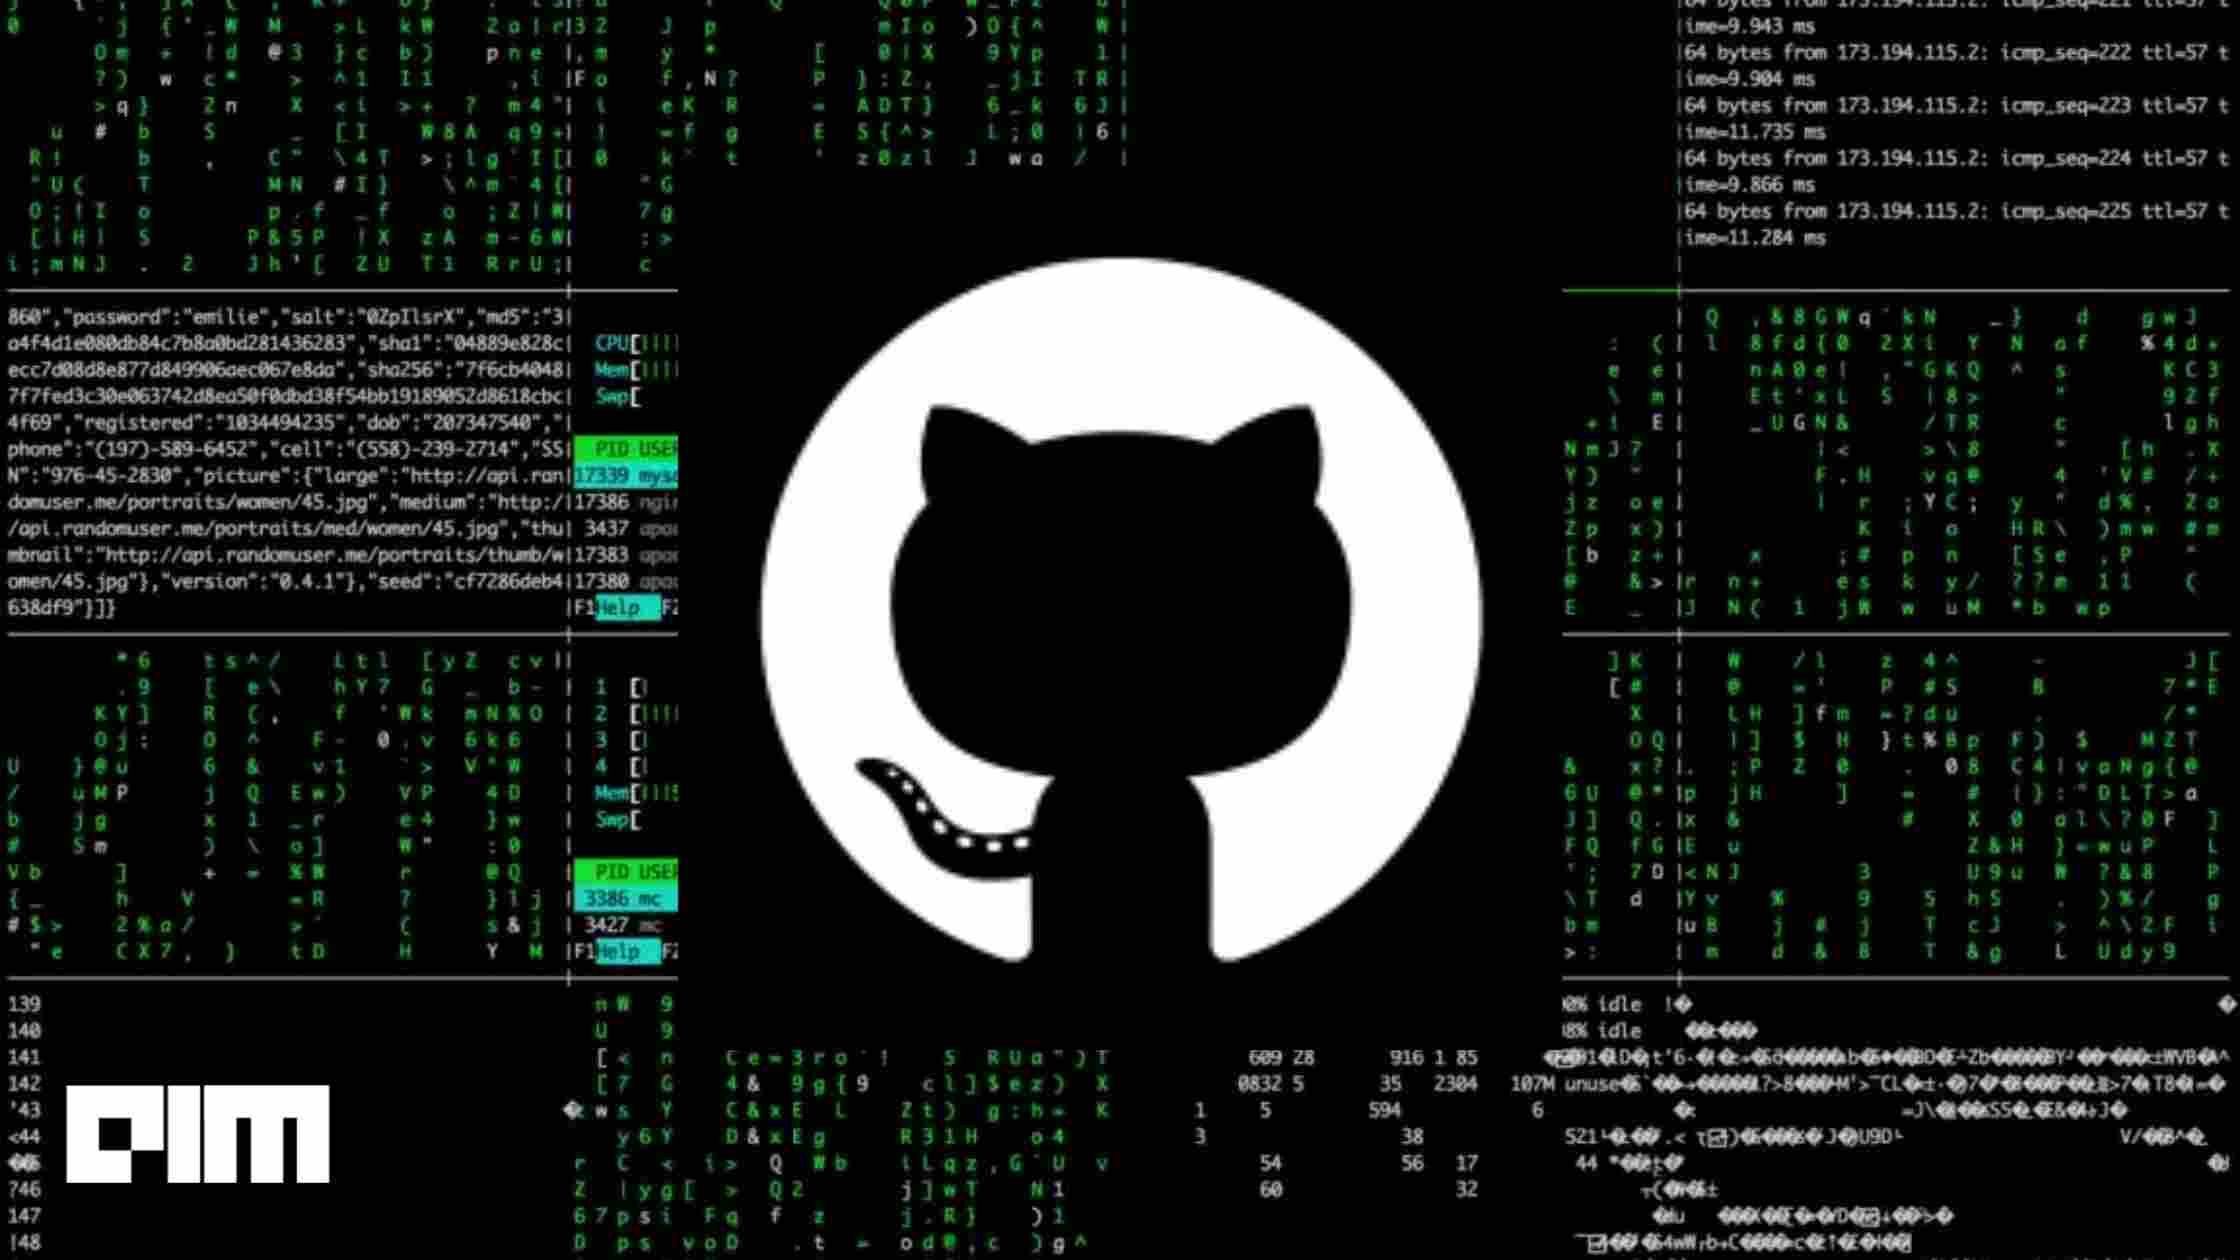 GitHub’s efforts to stop security vulnerabilities